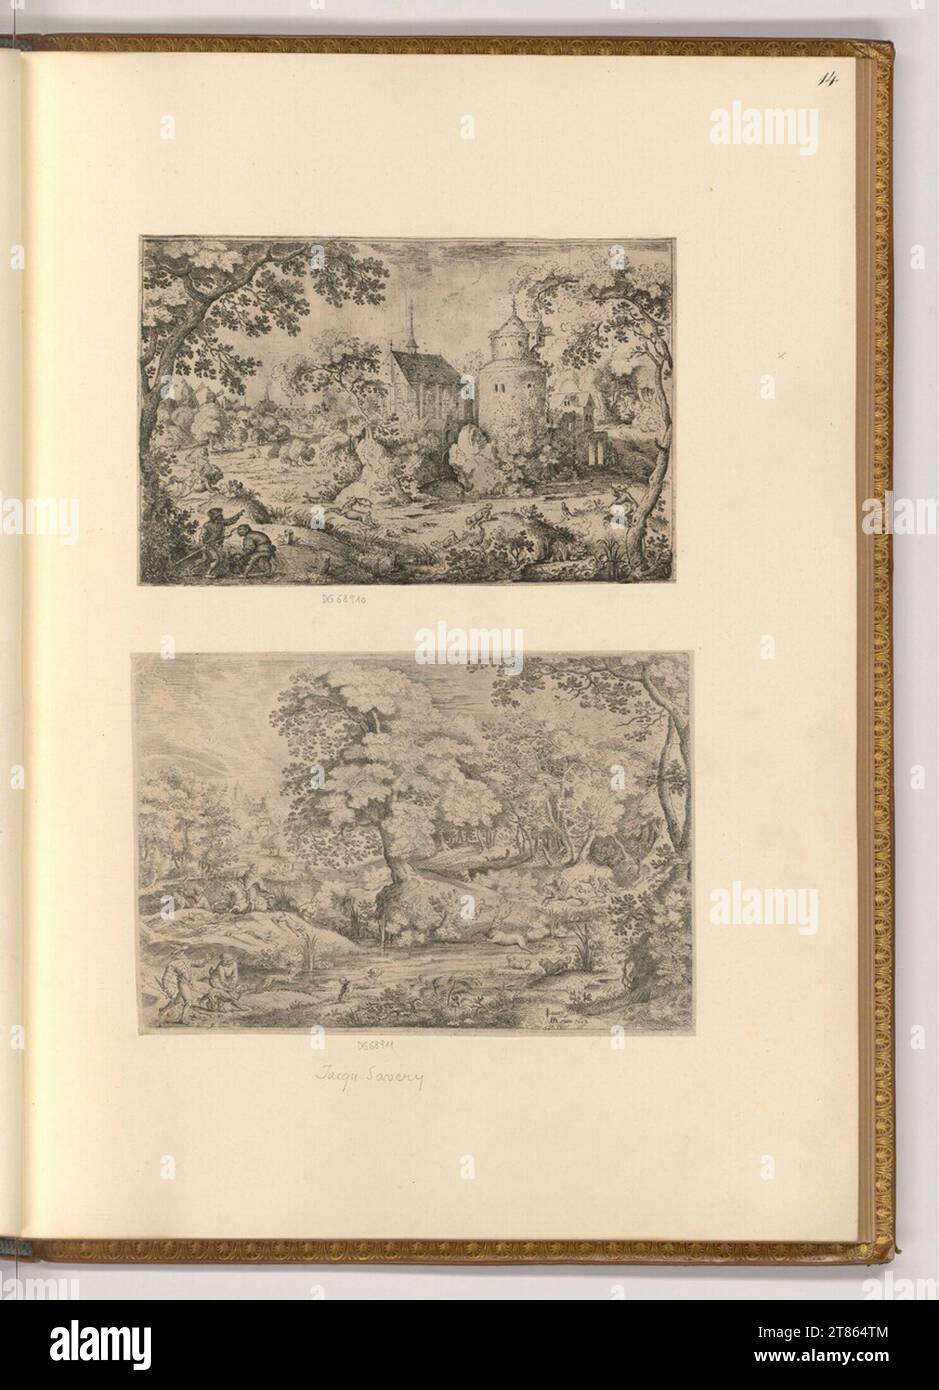 Jacob Savery I. (Engraver) Landscape with deer hunt. etching around 1602 Stock Photo